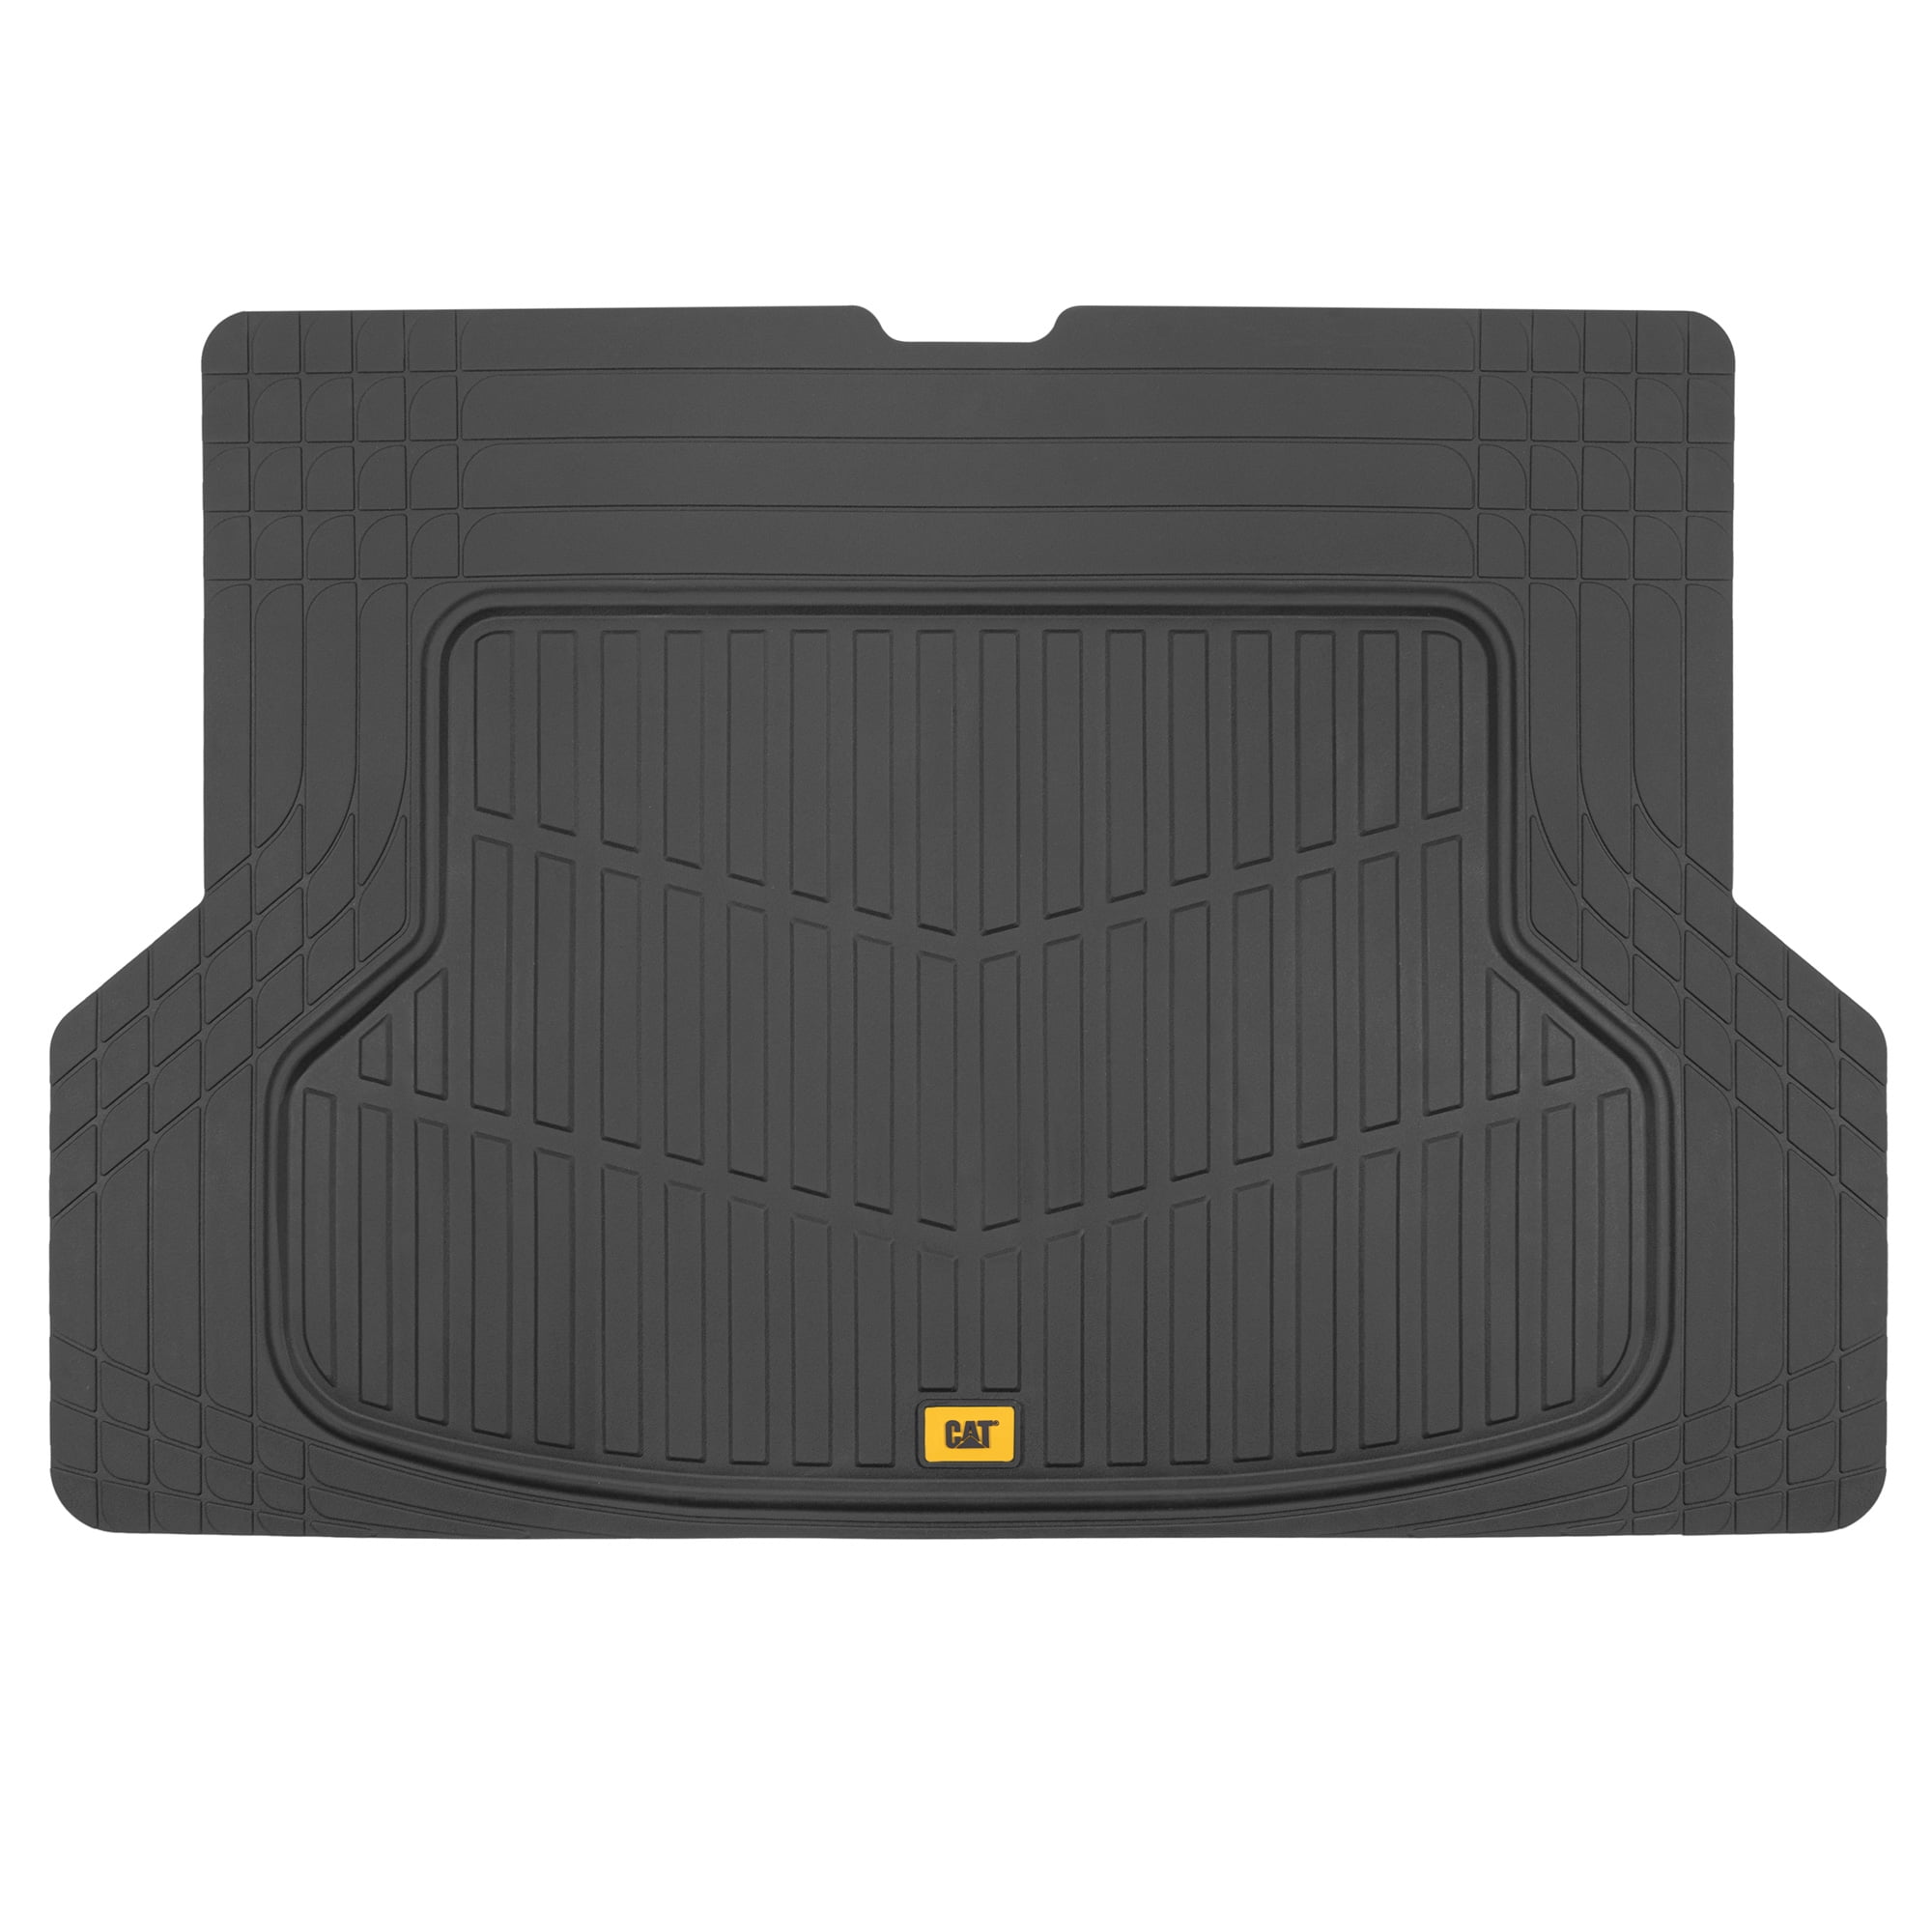 Caterpillar ToughRide Heavy-Duty Rubber Floor Mats & Cargo Trunk Liner for Car SUV Van Sedan All Weather Deep Dish Automotive Floor Mats Total Dirt Protection Black Odorless Trim to Fit 